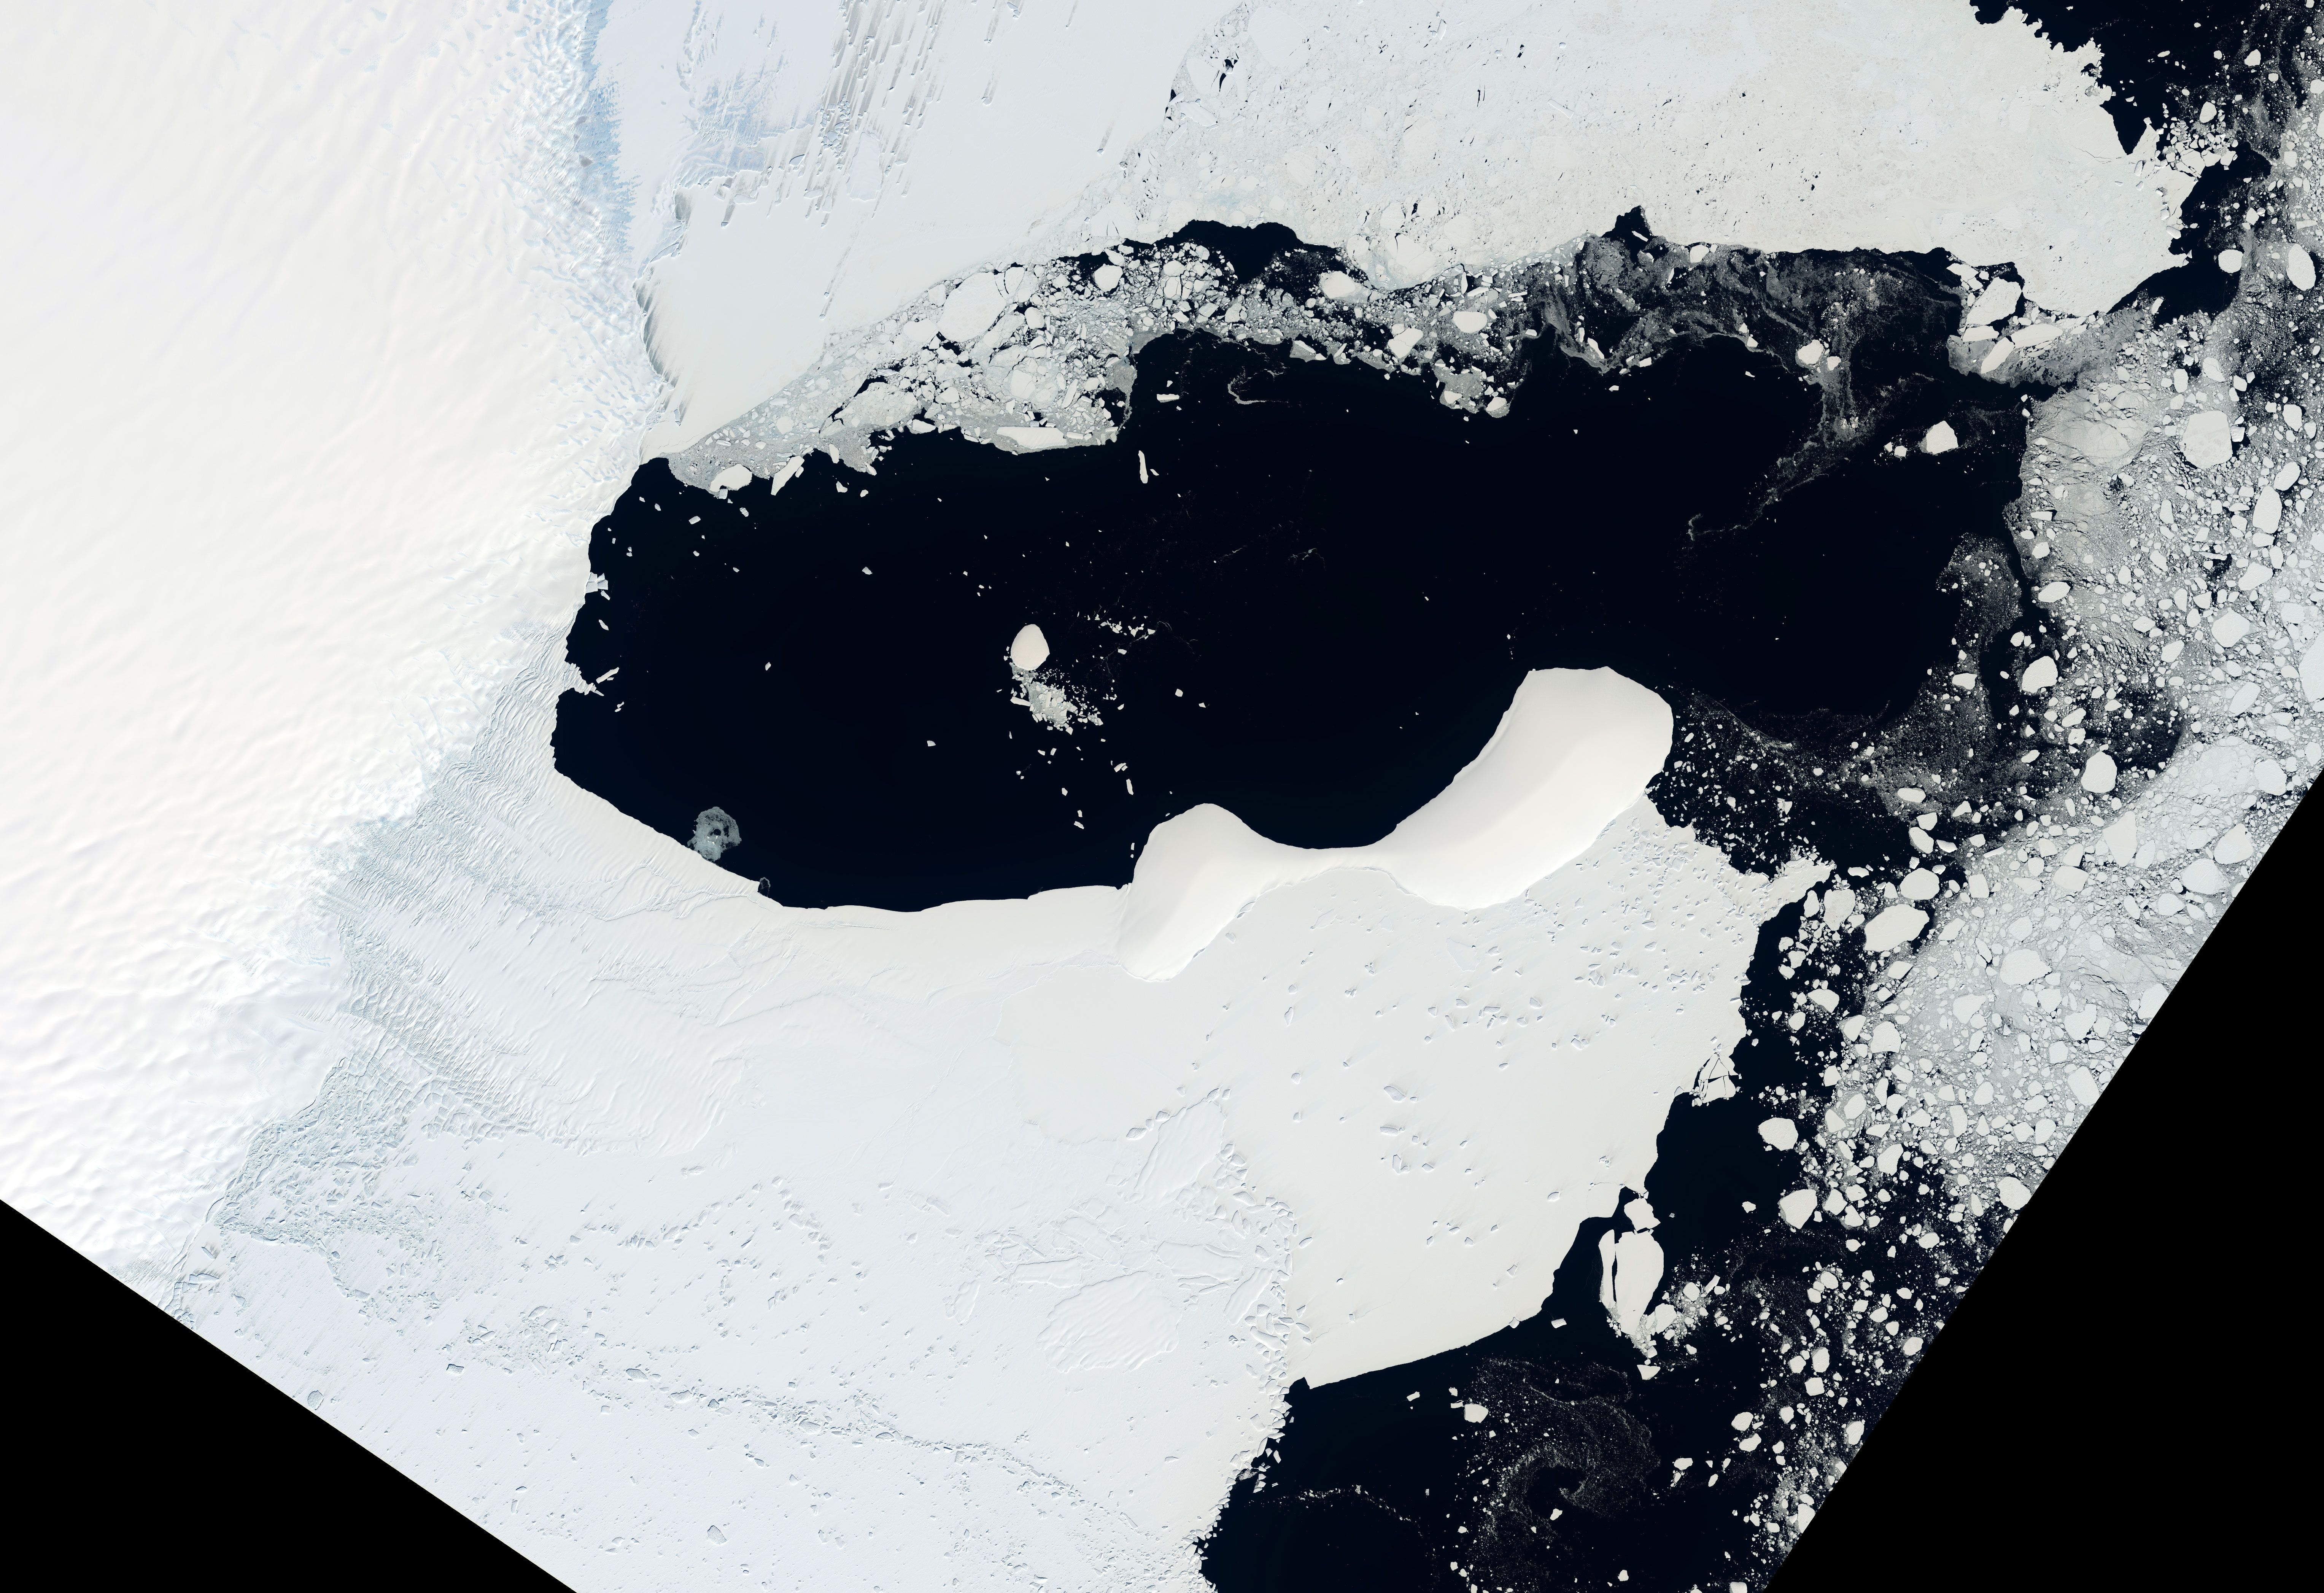 Satellite imagery shows a portion of East Antarctica on Jan. 9, 2022, before icebergs calved off the Glenzer and Conger glaciers. NISAR will observe nearly all of the planet’s land and ice surfaces twice every 12 days, monitoring Earth’s frozen regions, known as the cryosphere.